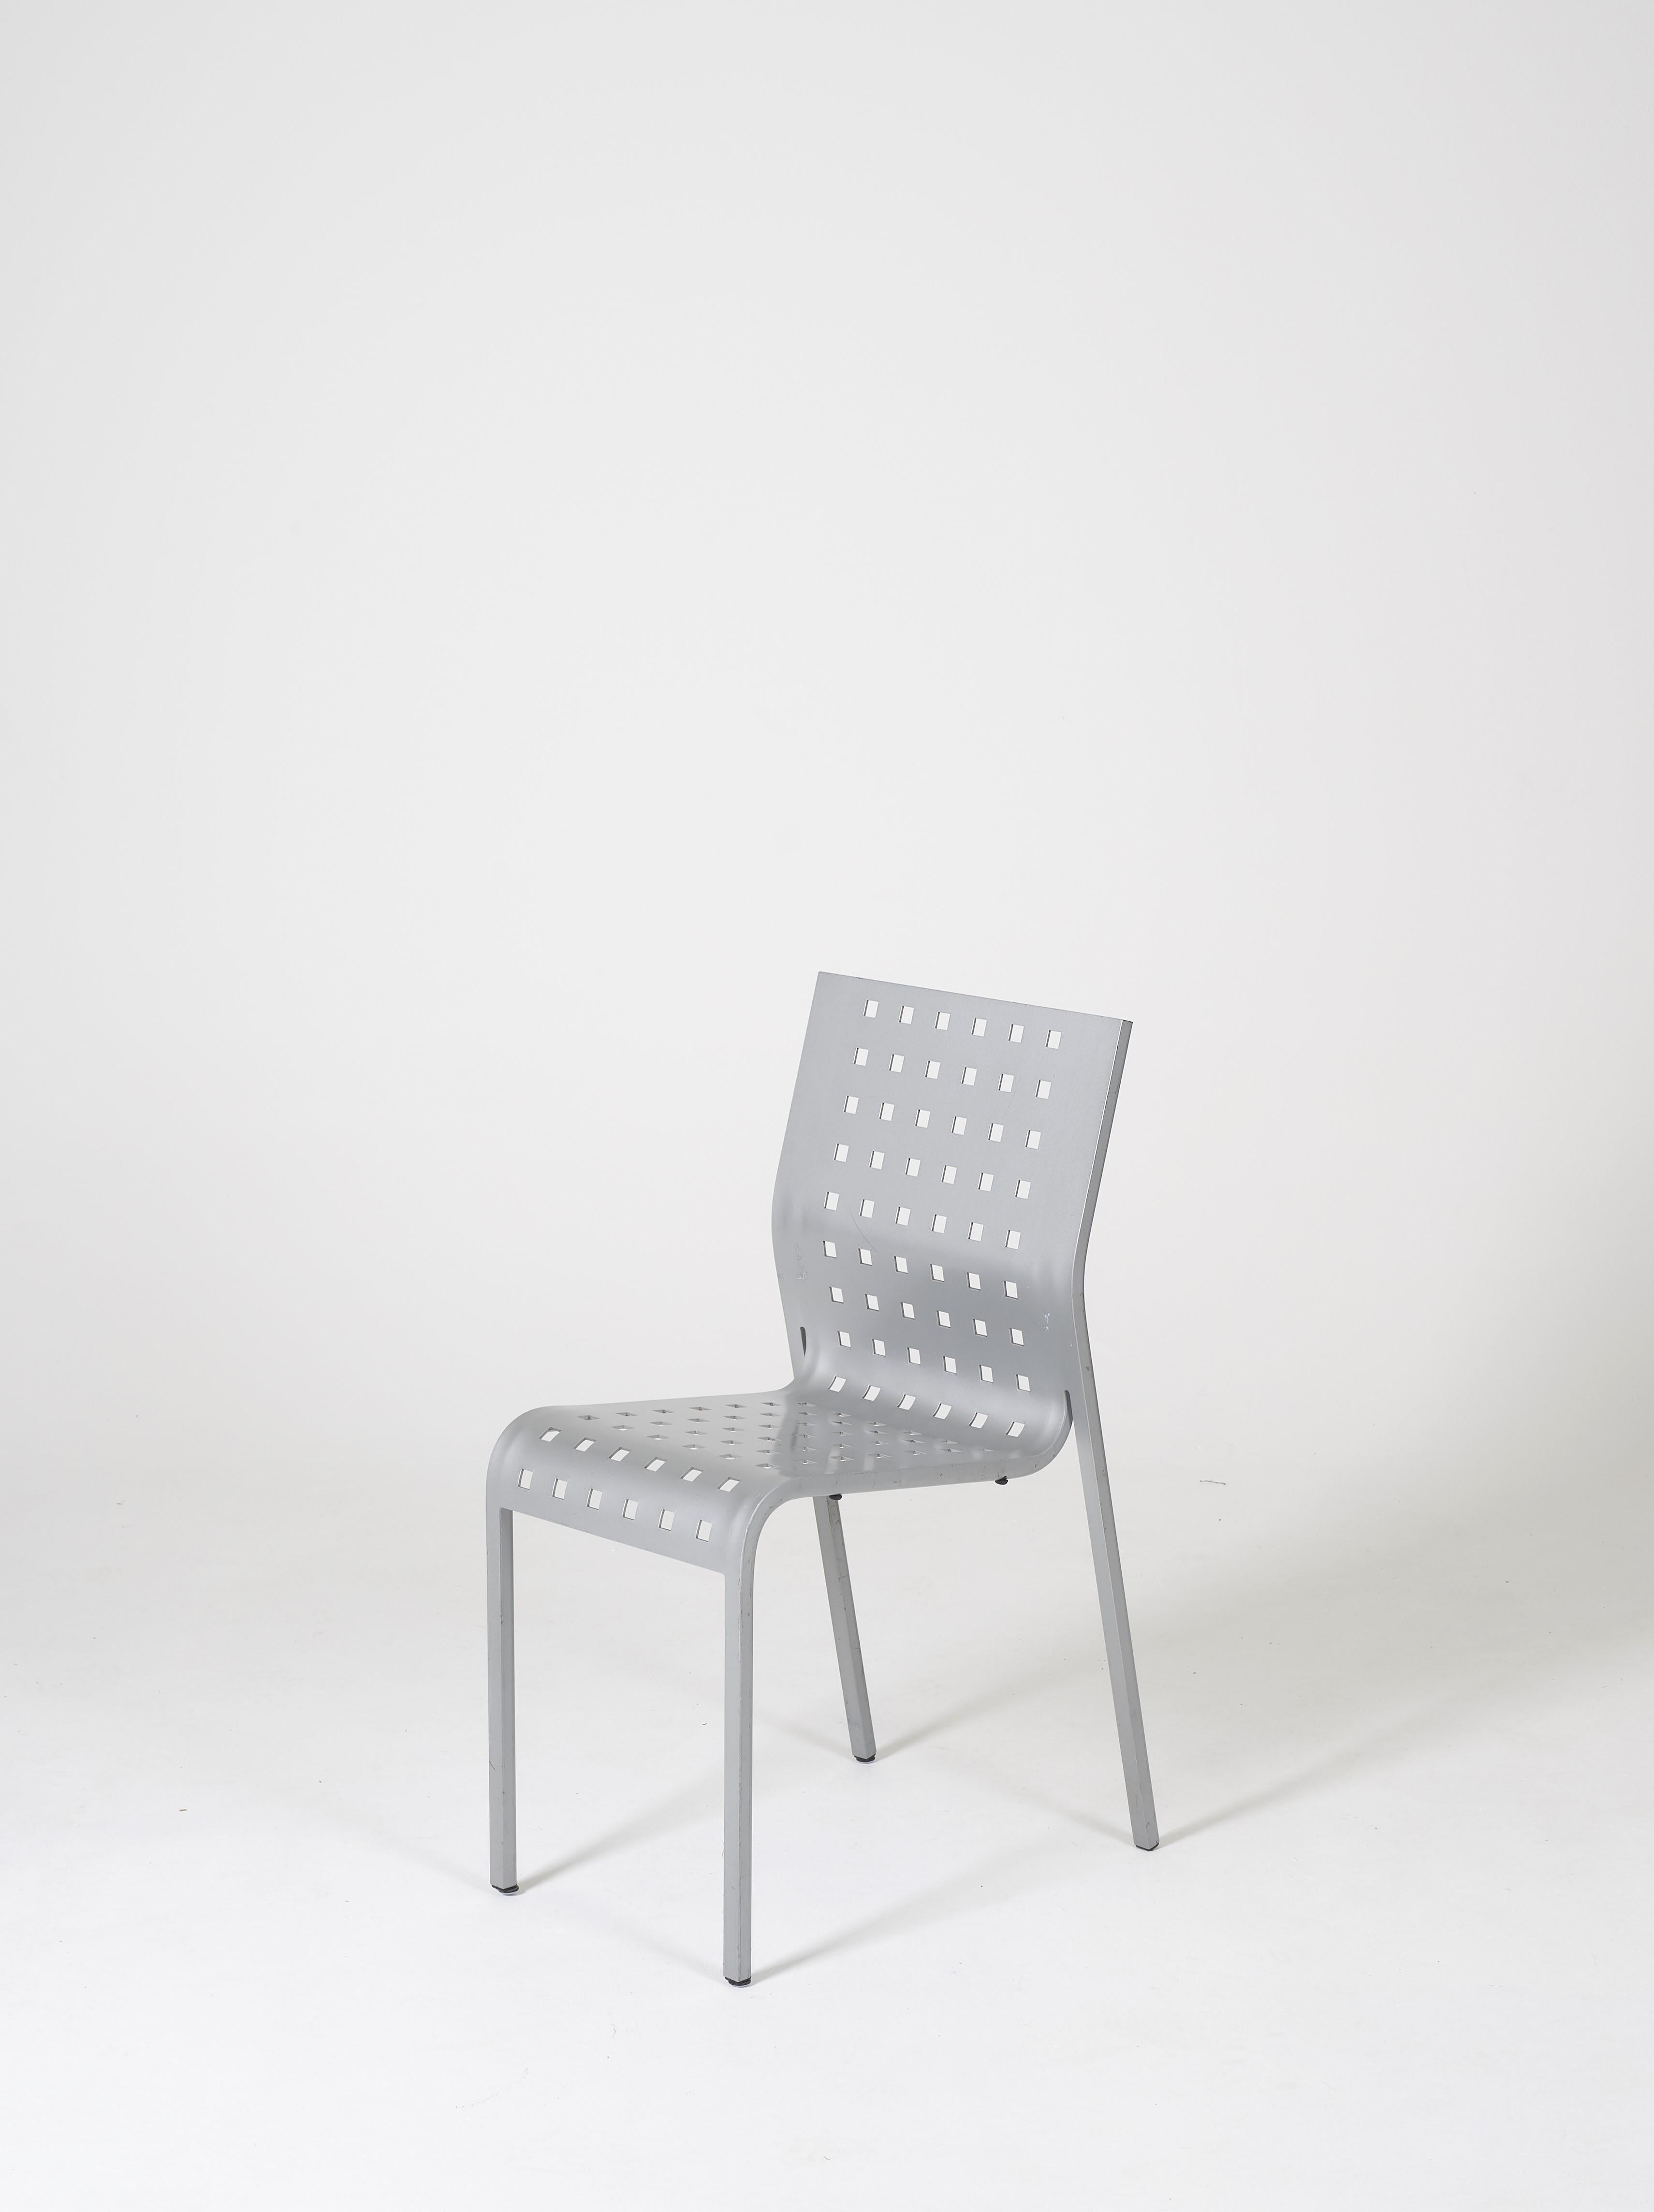 Mirandolina chair no. 2068 by Pietro Arosio for Zanotta, Italy 1990s. The seat is made of a single piece of curved aluminum. Very comfortable.